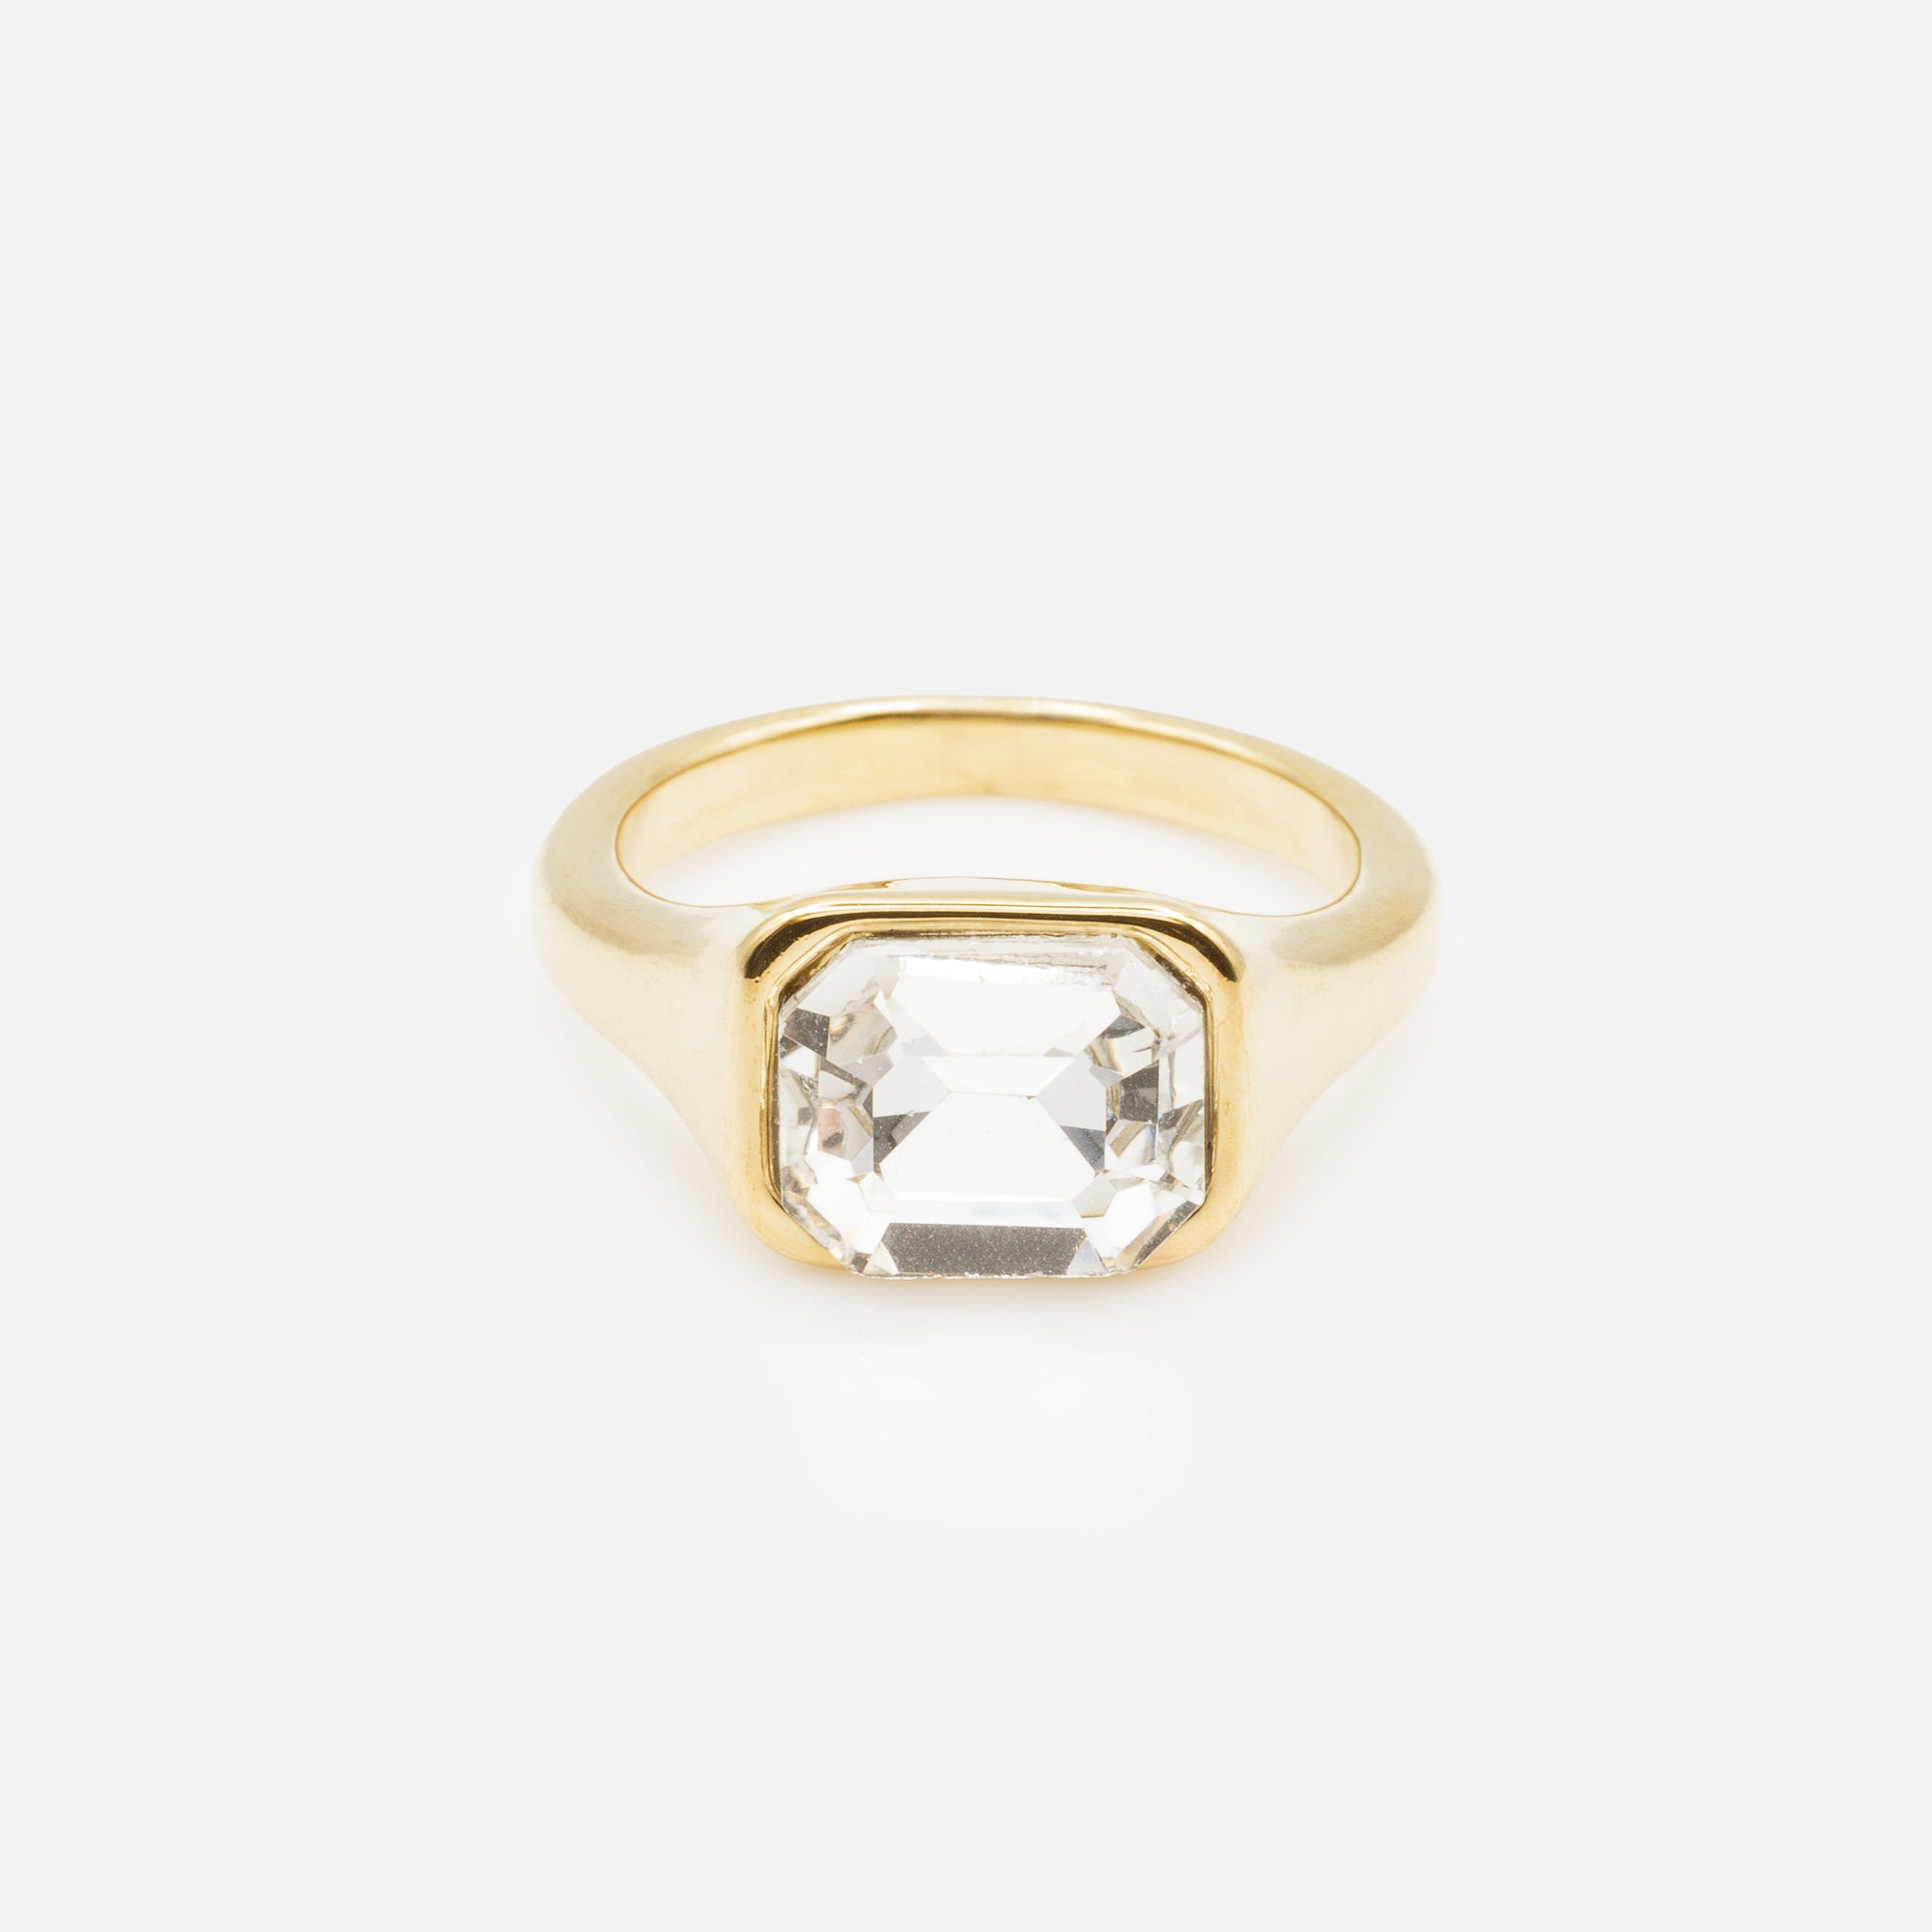 Gold ring with large cubic zirconia in stainless steel